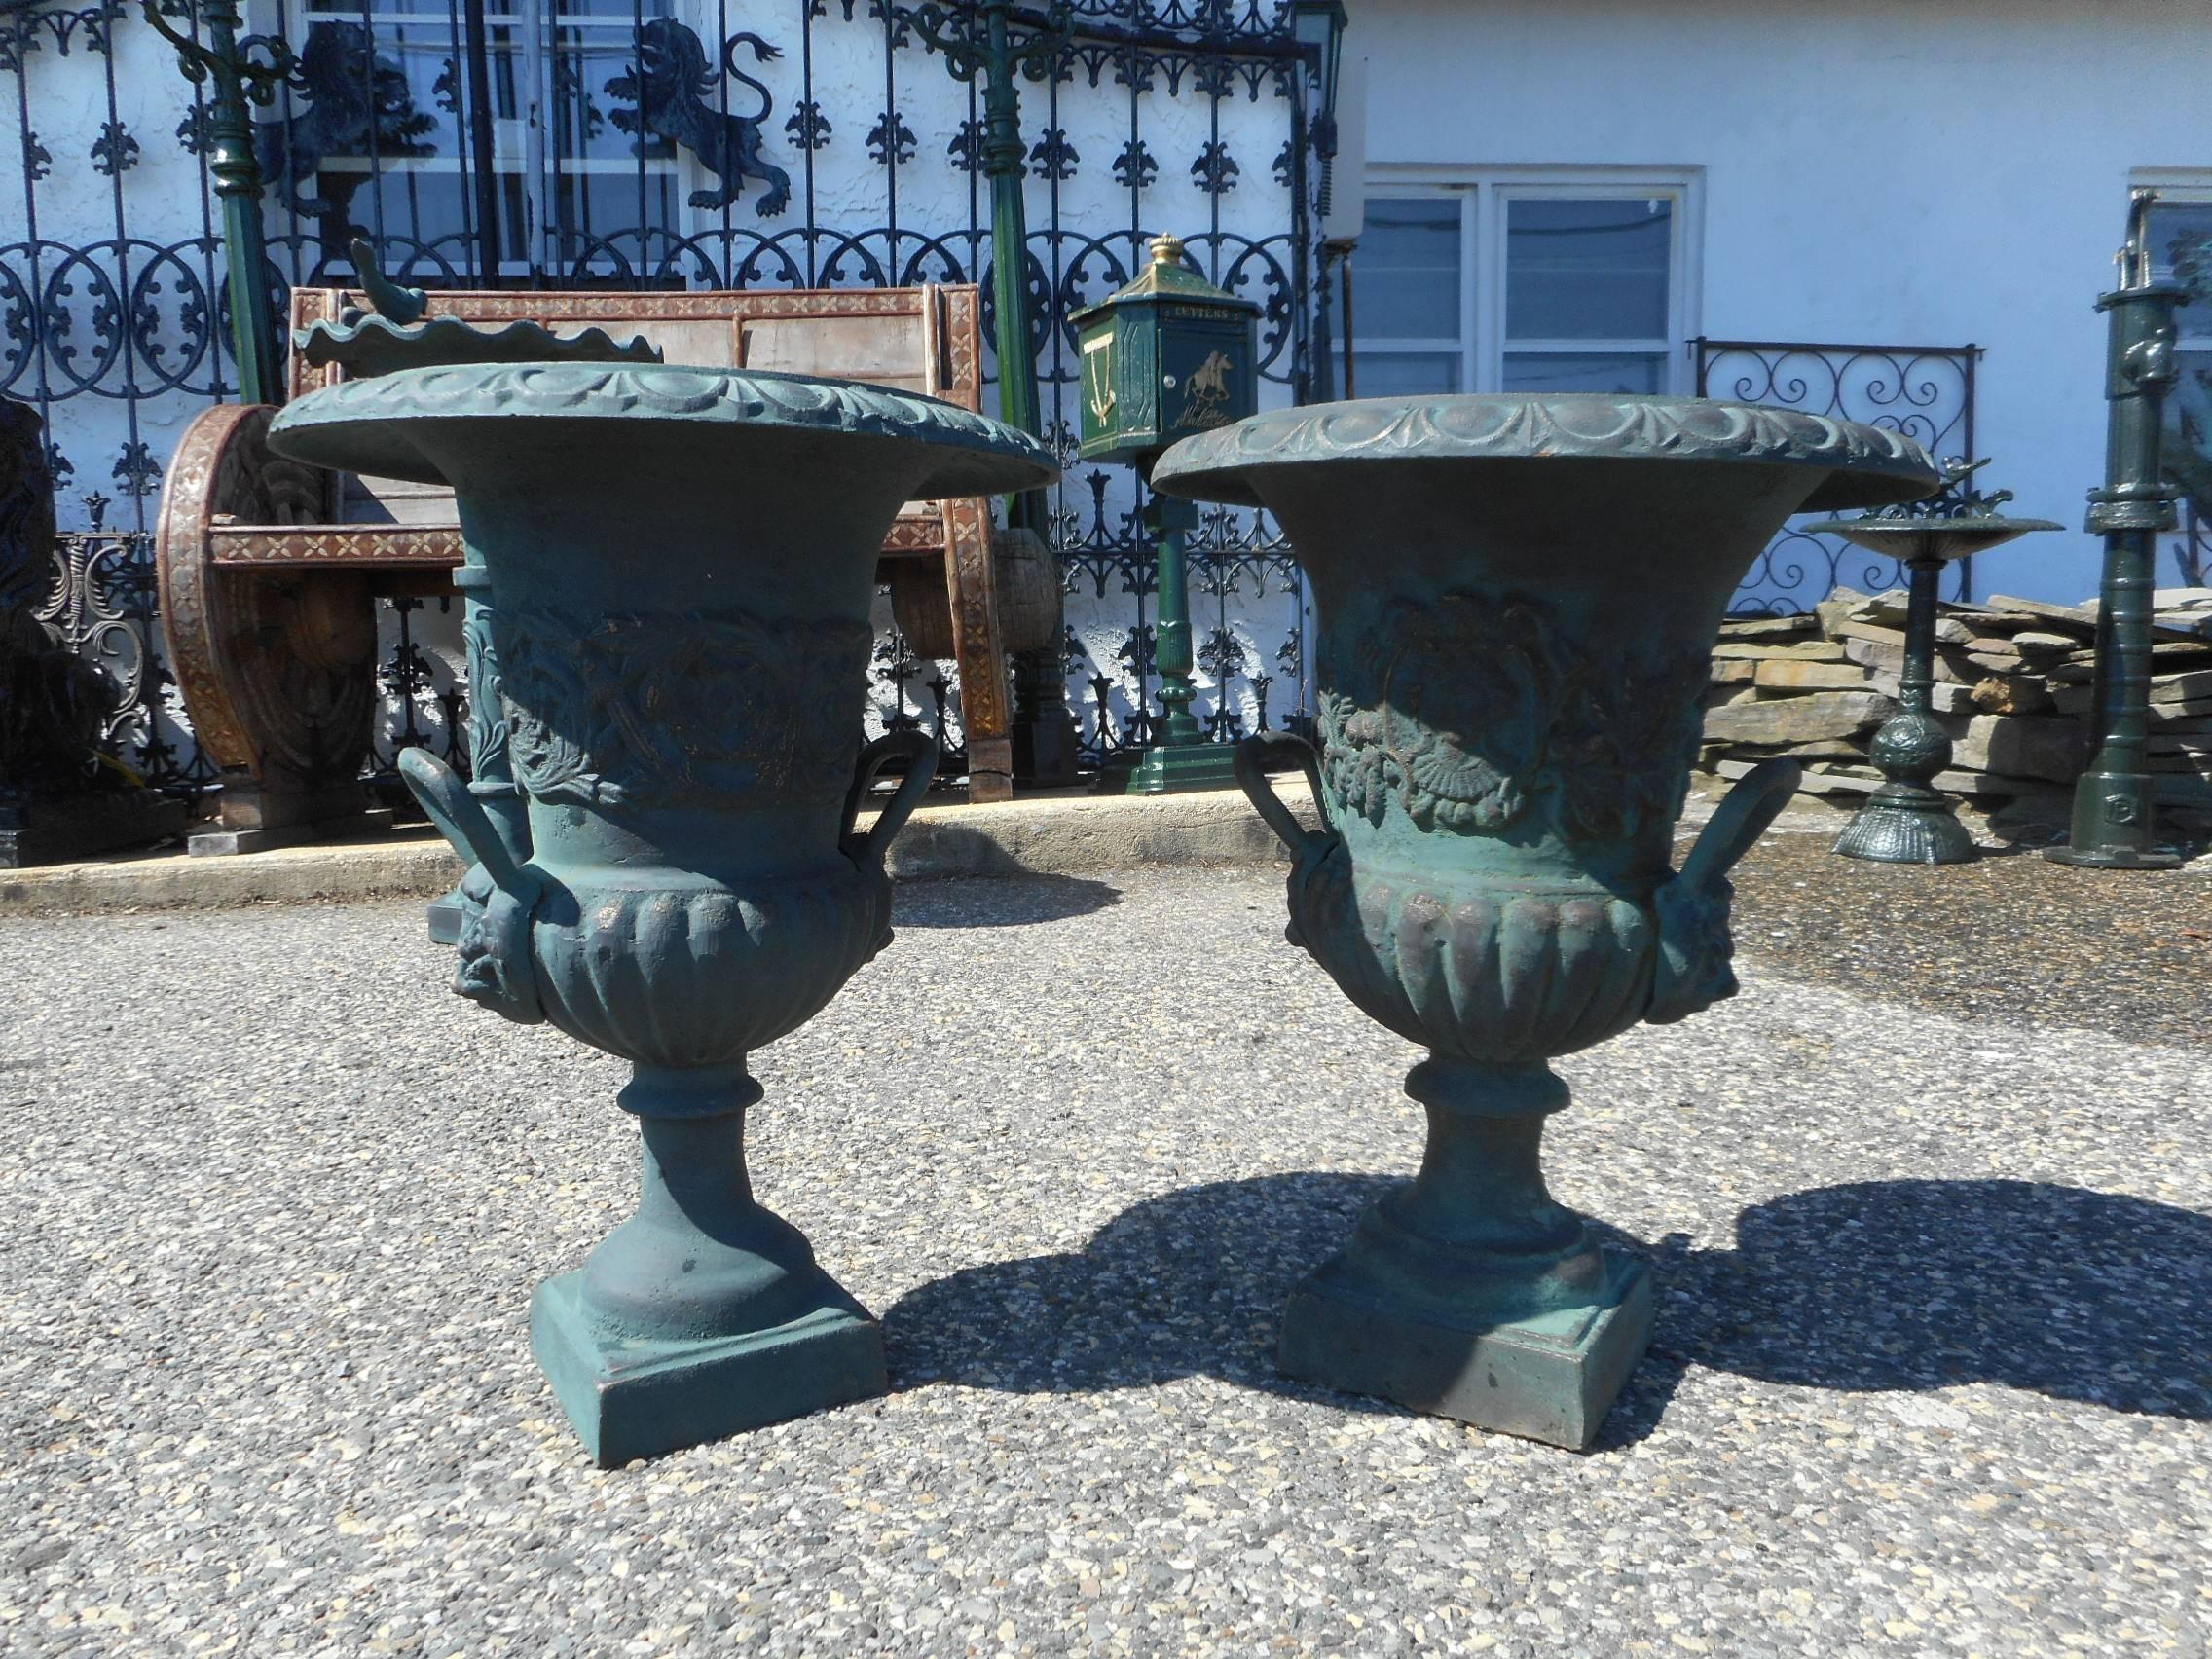 This beautiful pair of cast iron urns feature decorative handles on each side, etched designs, and a pedestal base. A large opening on top provides ample space to put plants or flowers inside for display. A gorgeous design that makes an impression